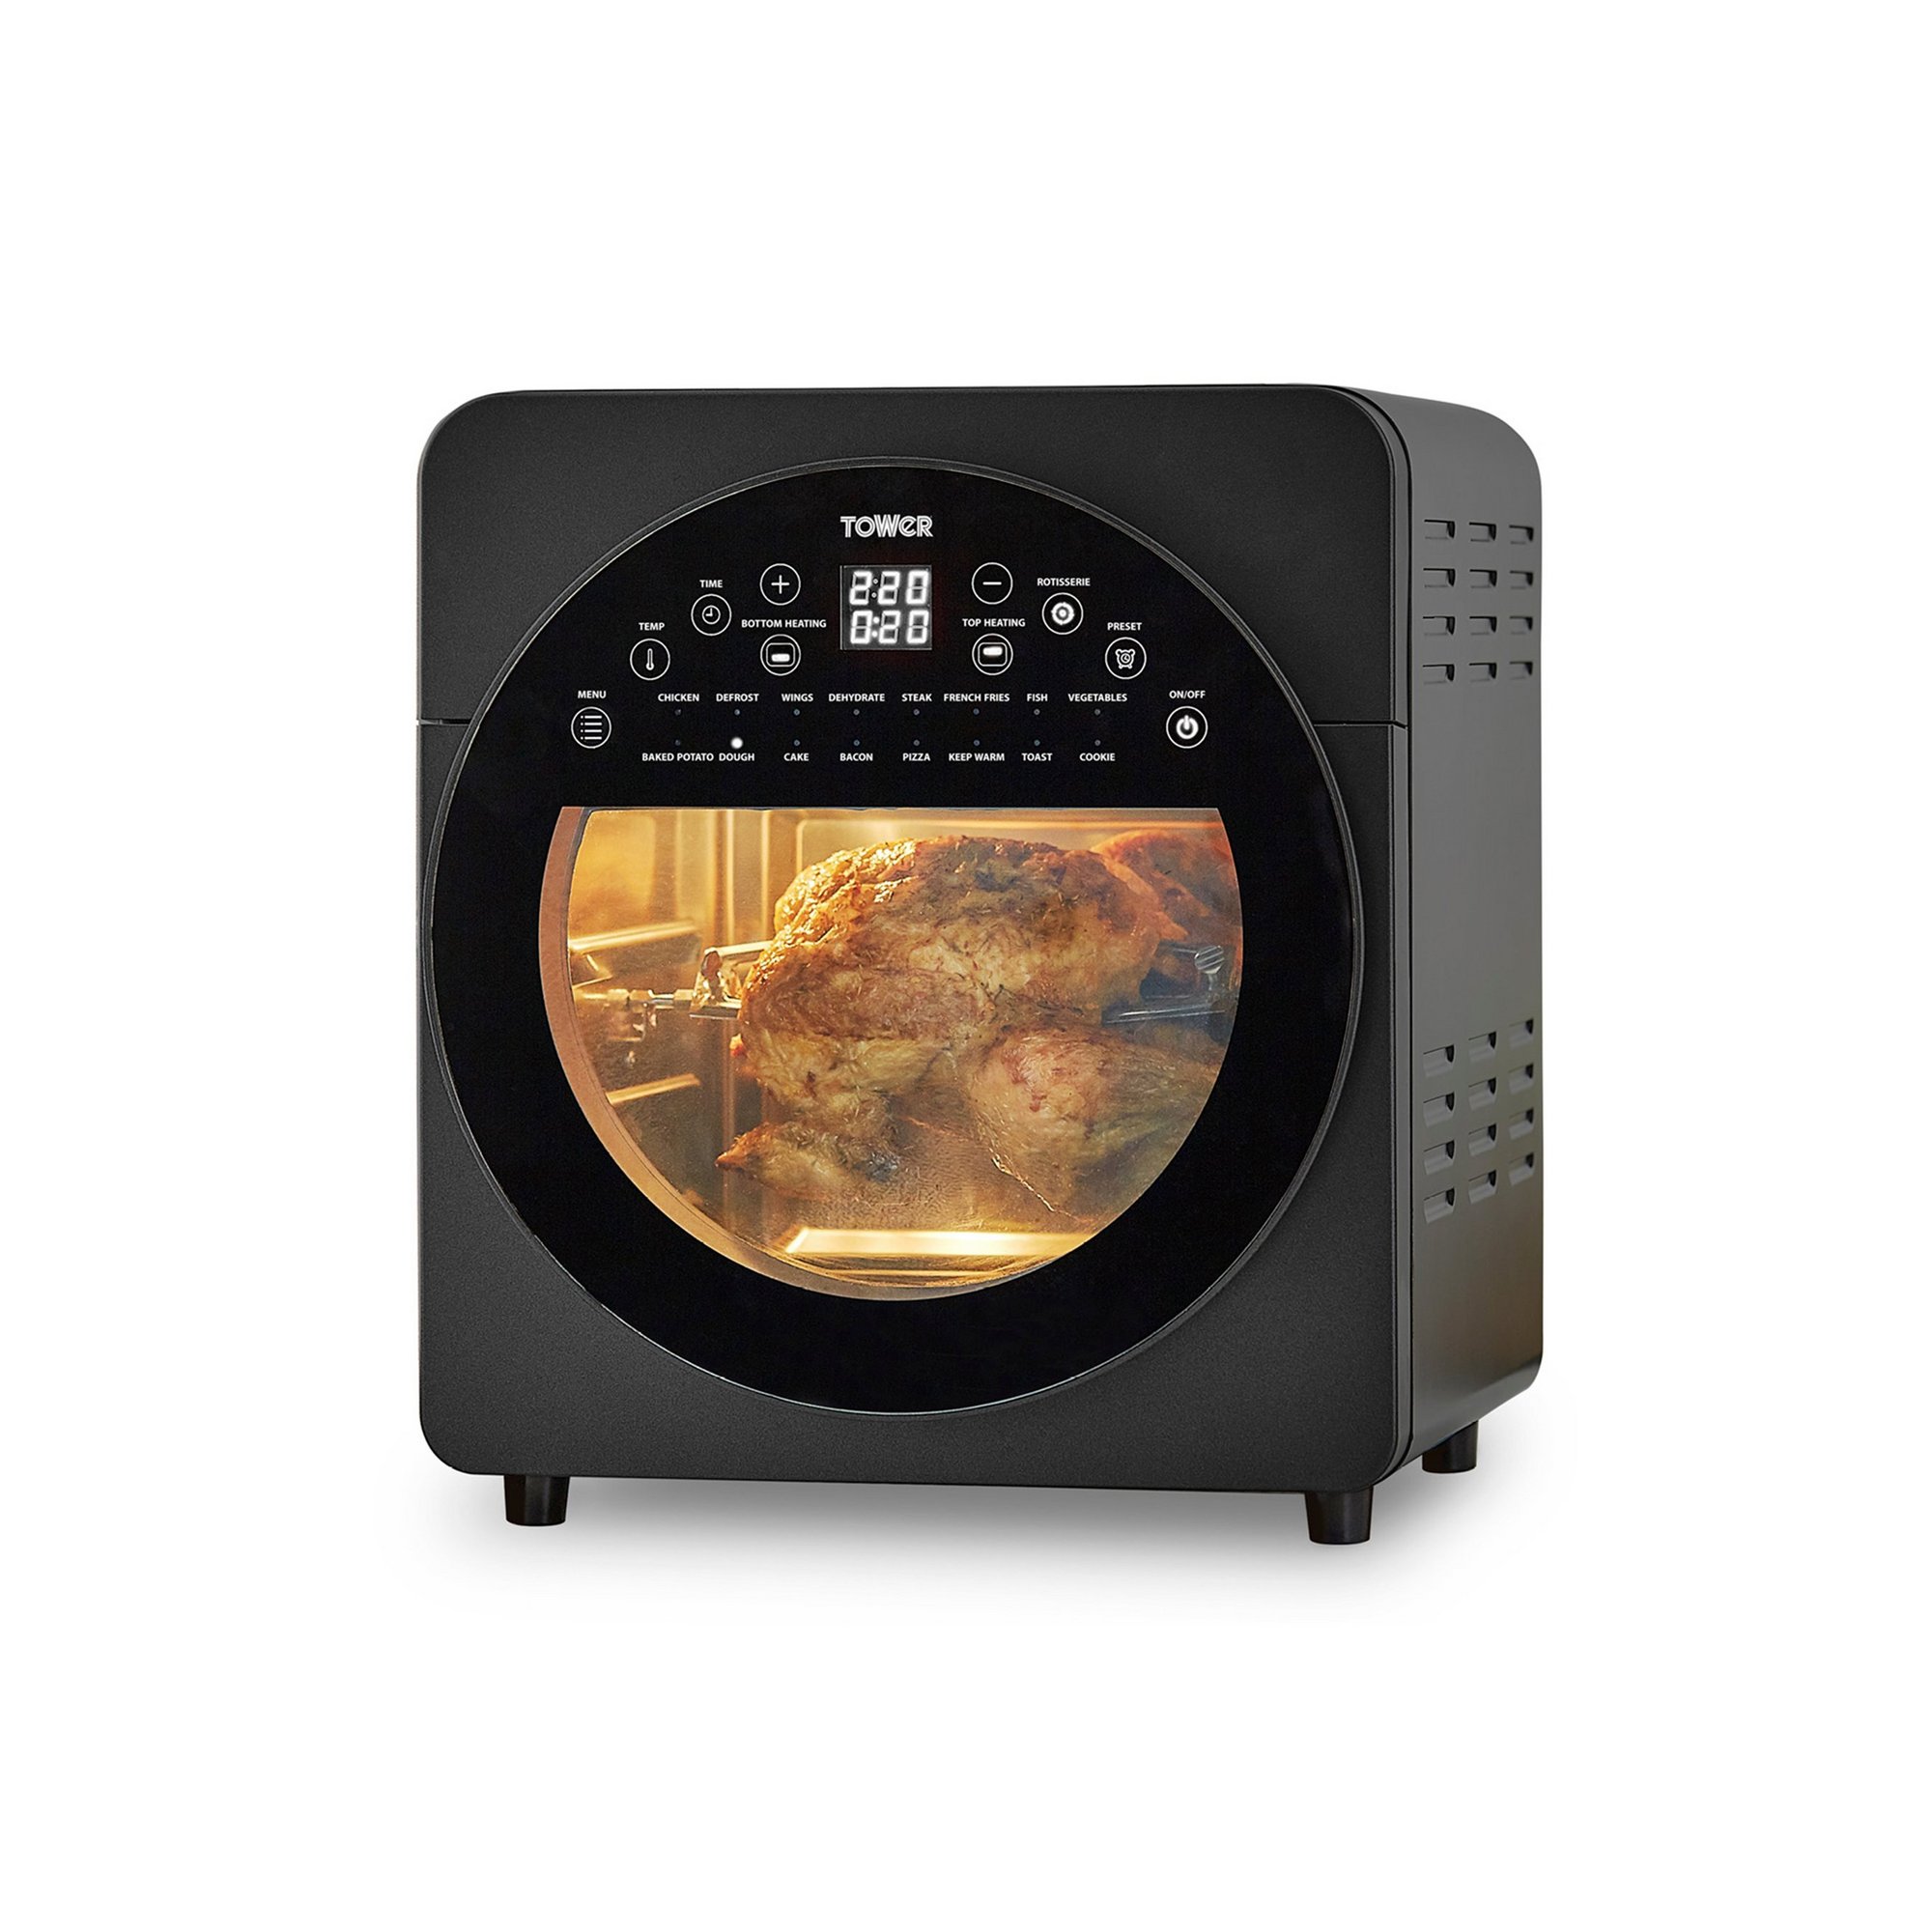 Tower Vortx XL 14.5Litre 5in1 Digital Air Fryer Oven with Rotisserie